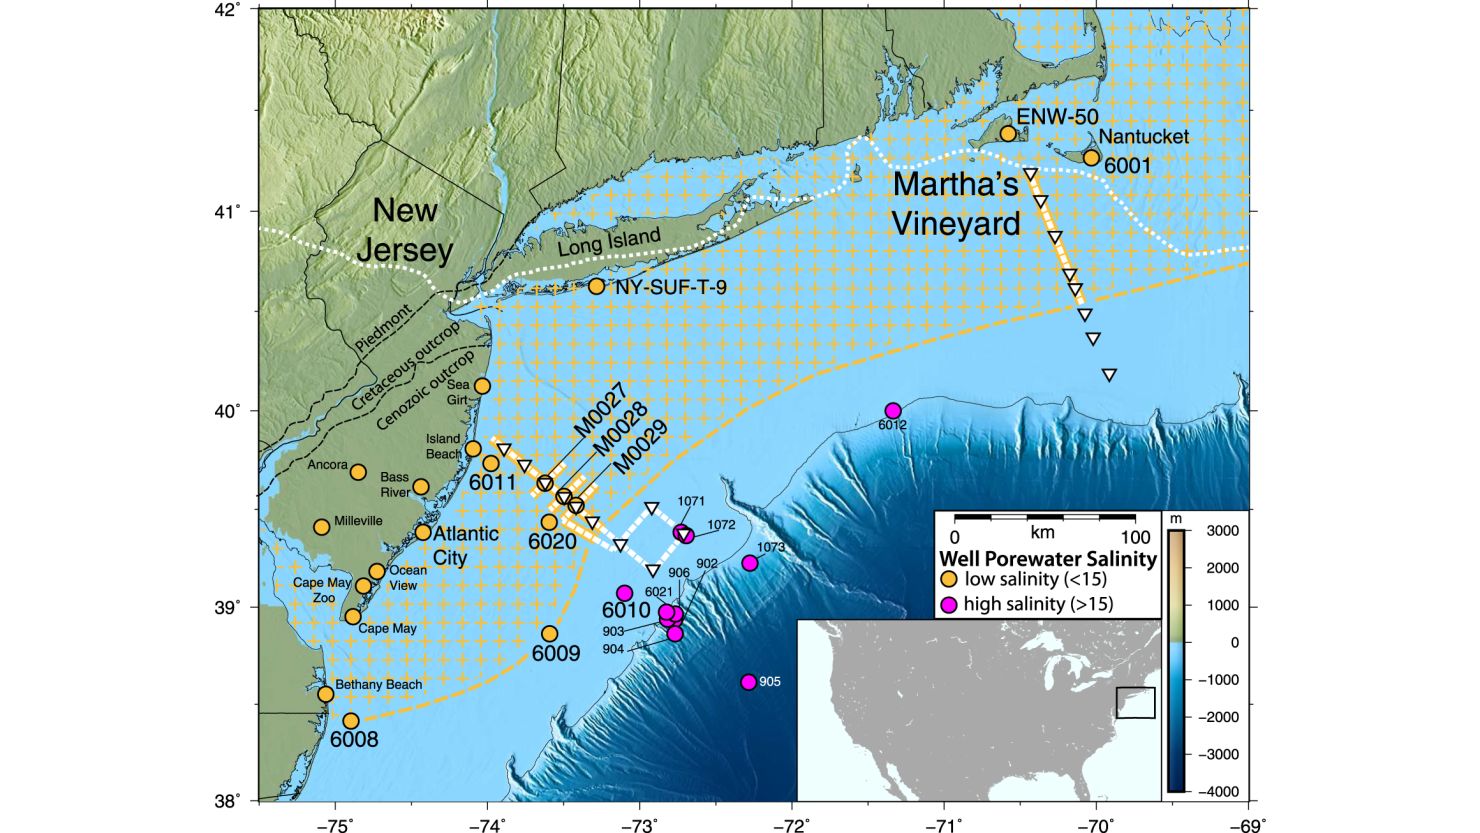 The freshwater aquifer runs from coastal New Jersey up to the waters around Massachusetts.